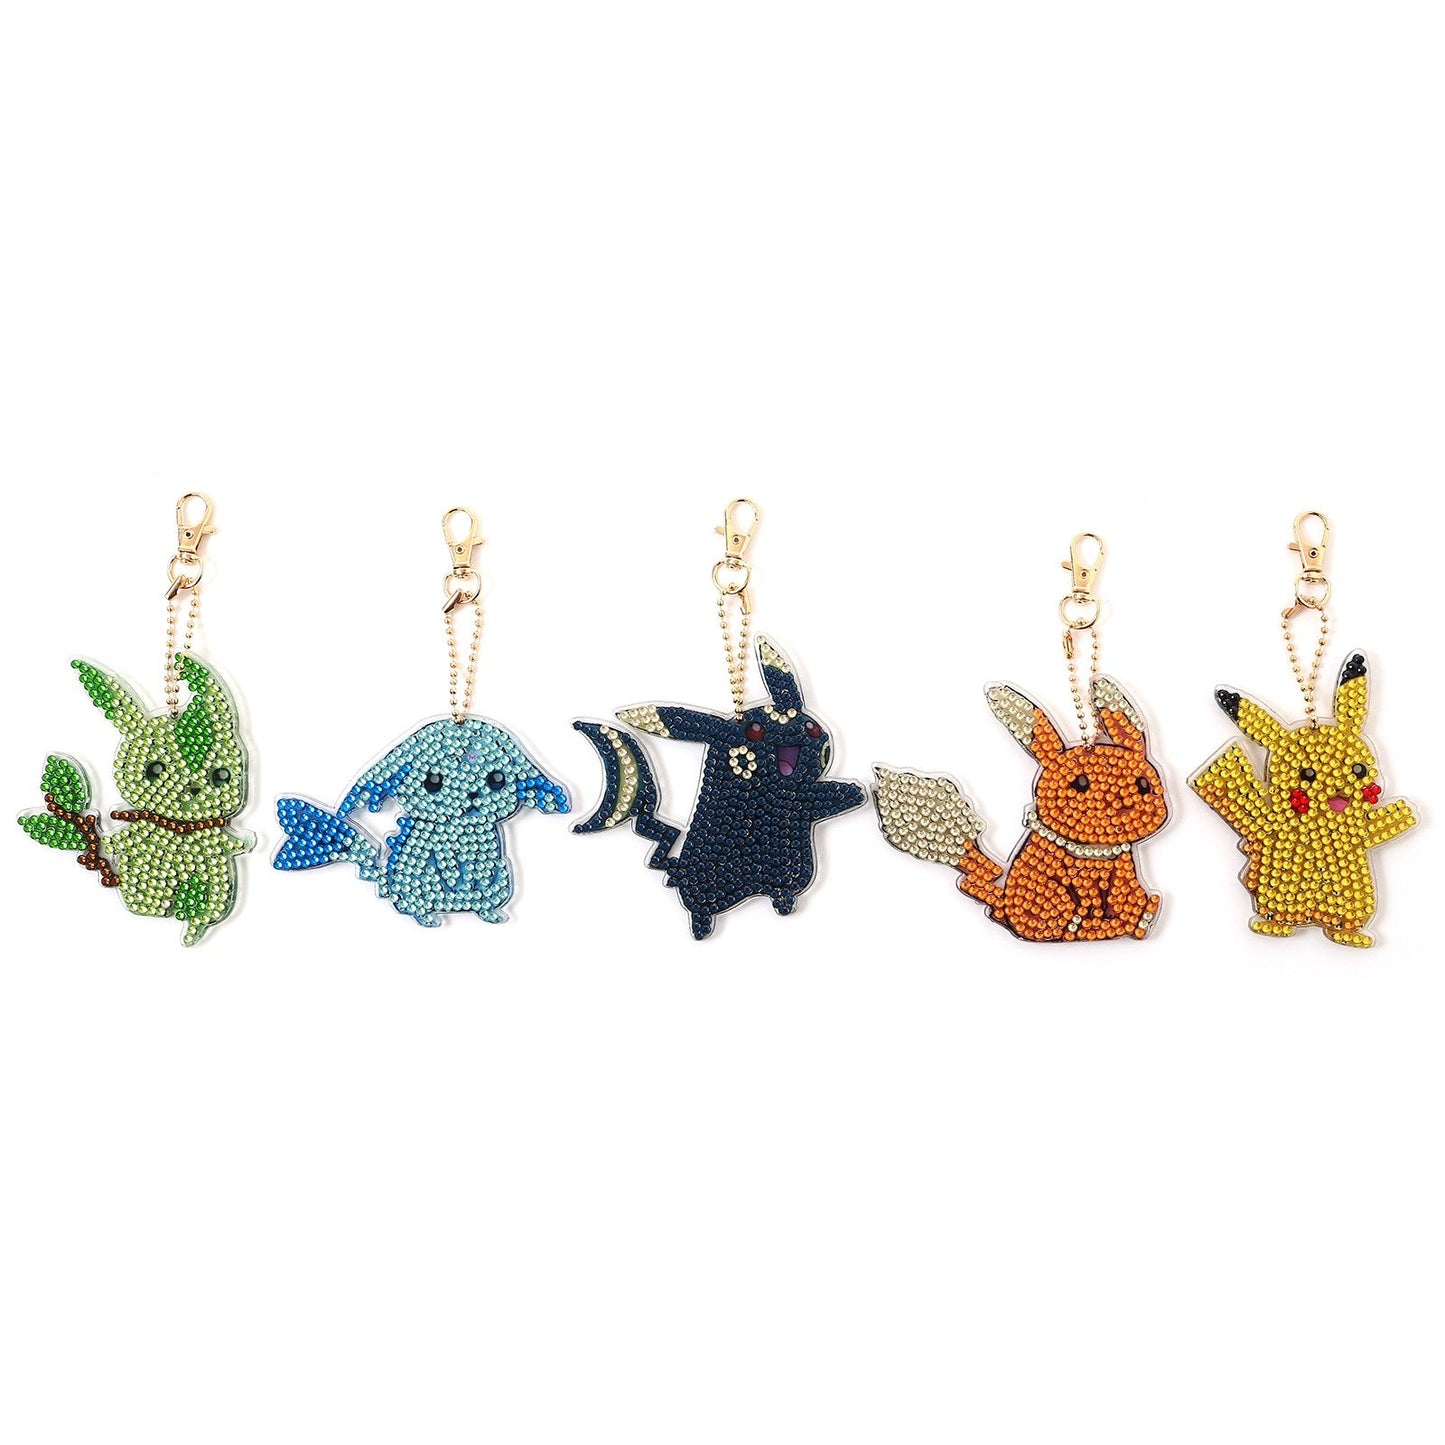 Blingbling's Keychain | Pocket Monsters | Five Piece Set